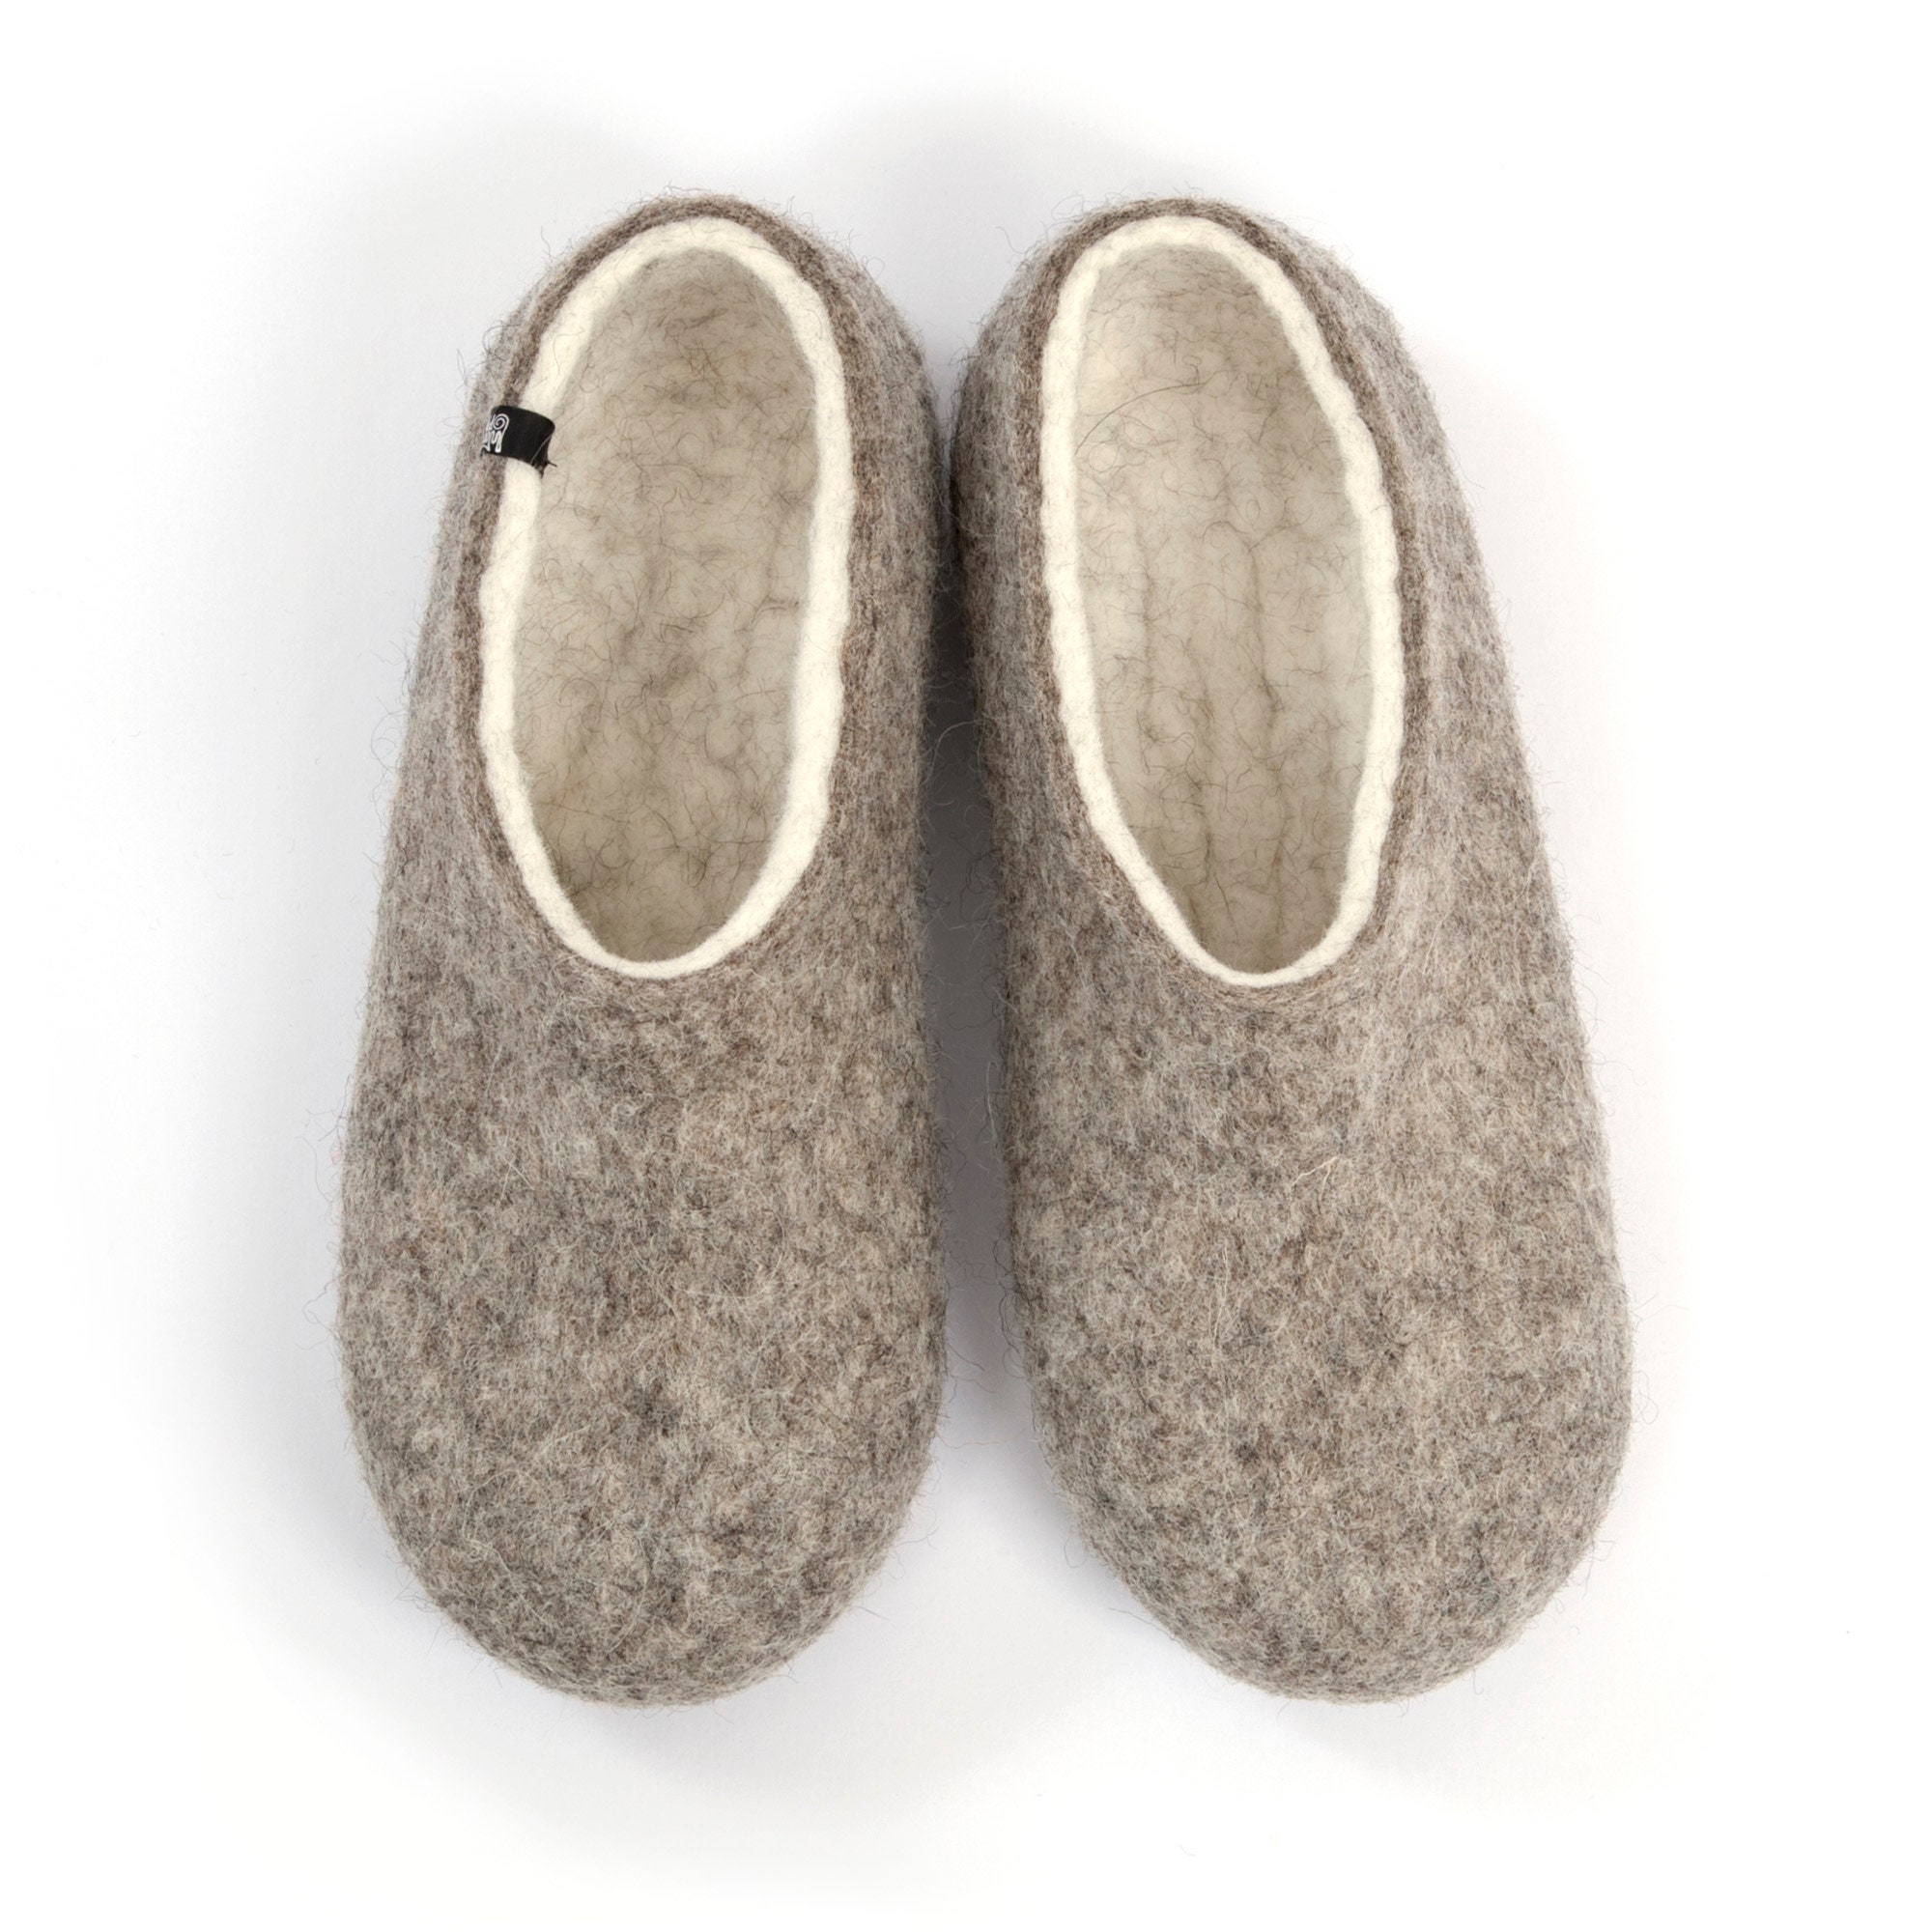 Organic Indoor Shoes, Felted Wool Slippers For Men, Clogs, Eco Friendly House Slippers, Grey Cool Slippers Mens Felt